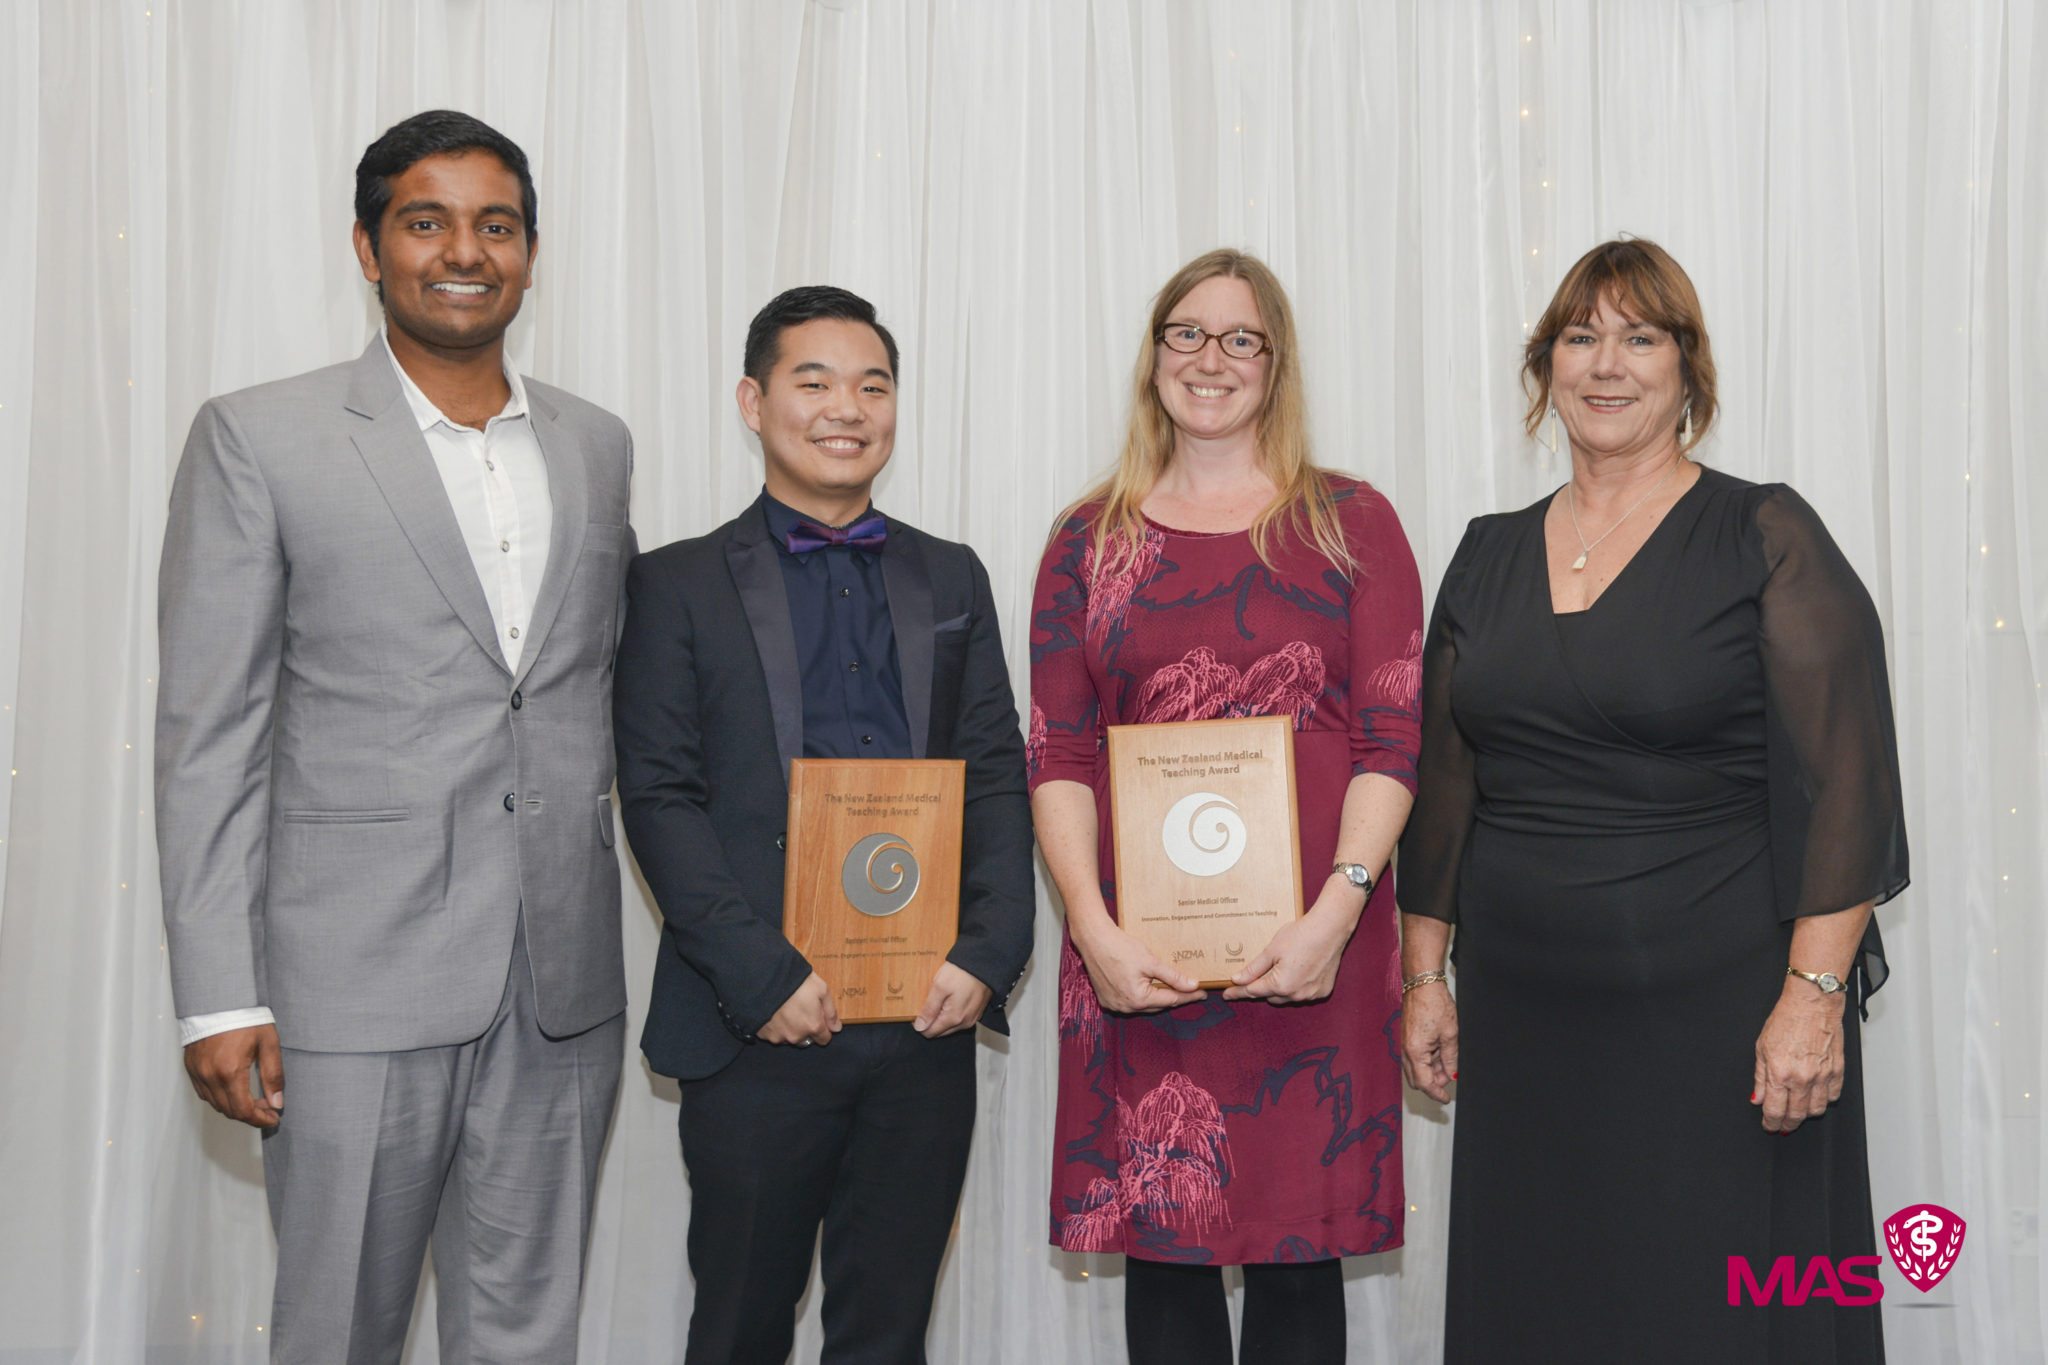 NZ Medical Students Assn 2 awards recipients and 2 sponsors